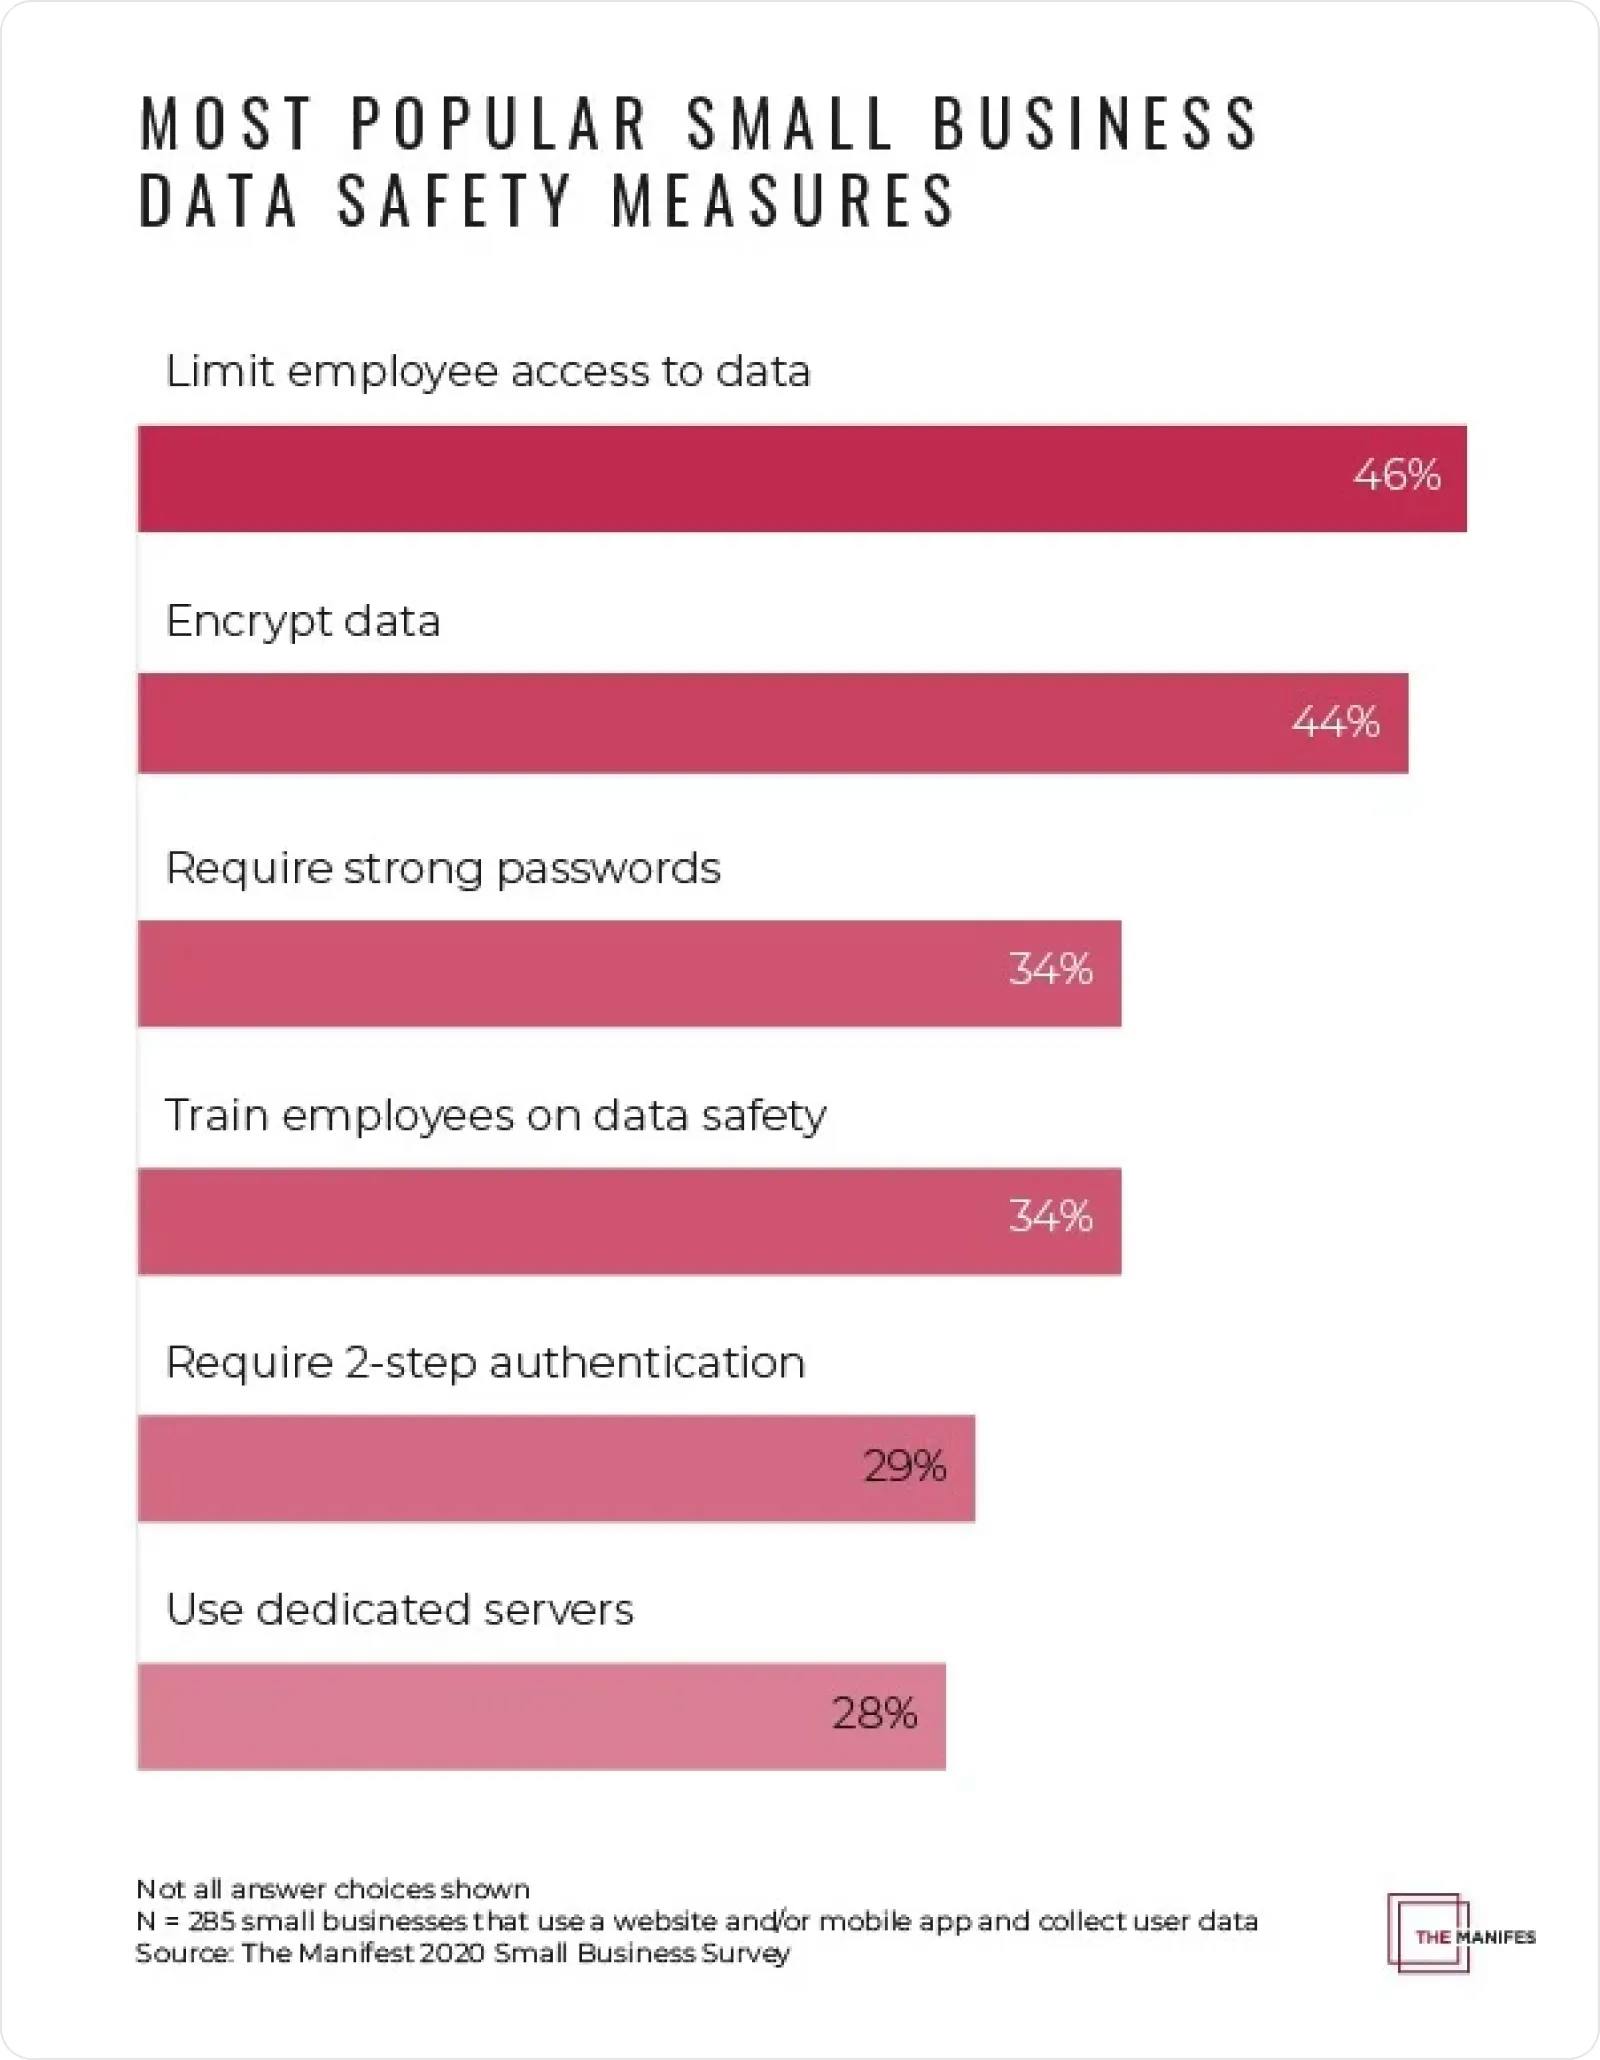 Most popular small business data safety measures